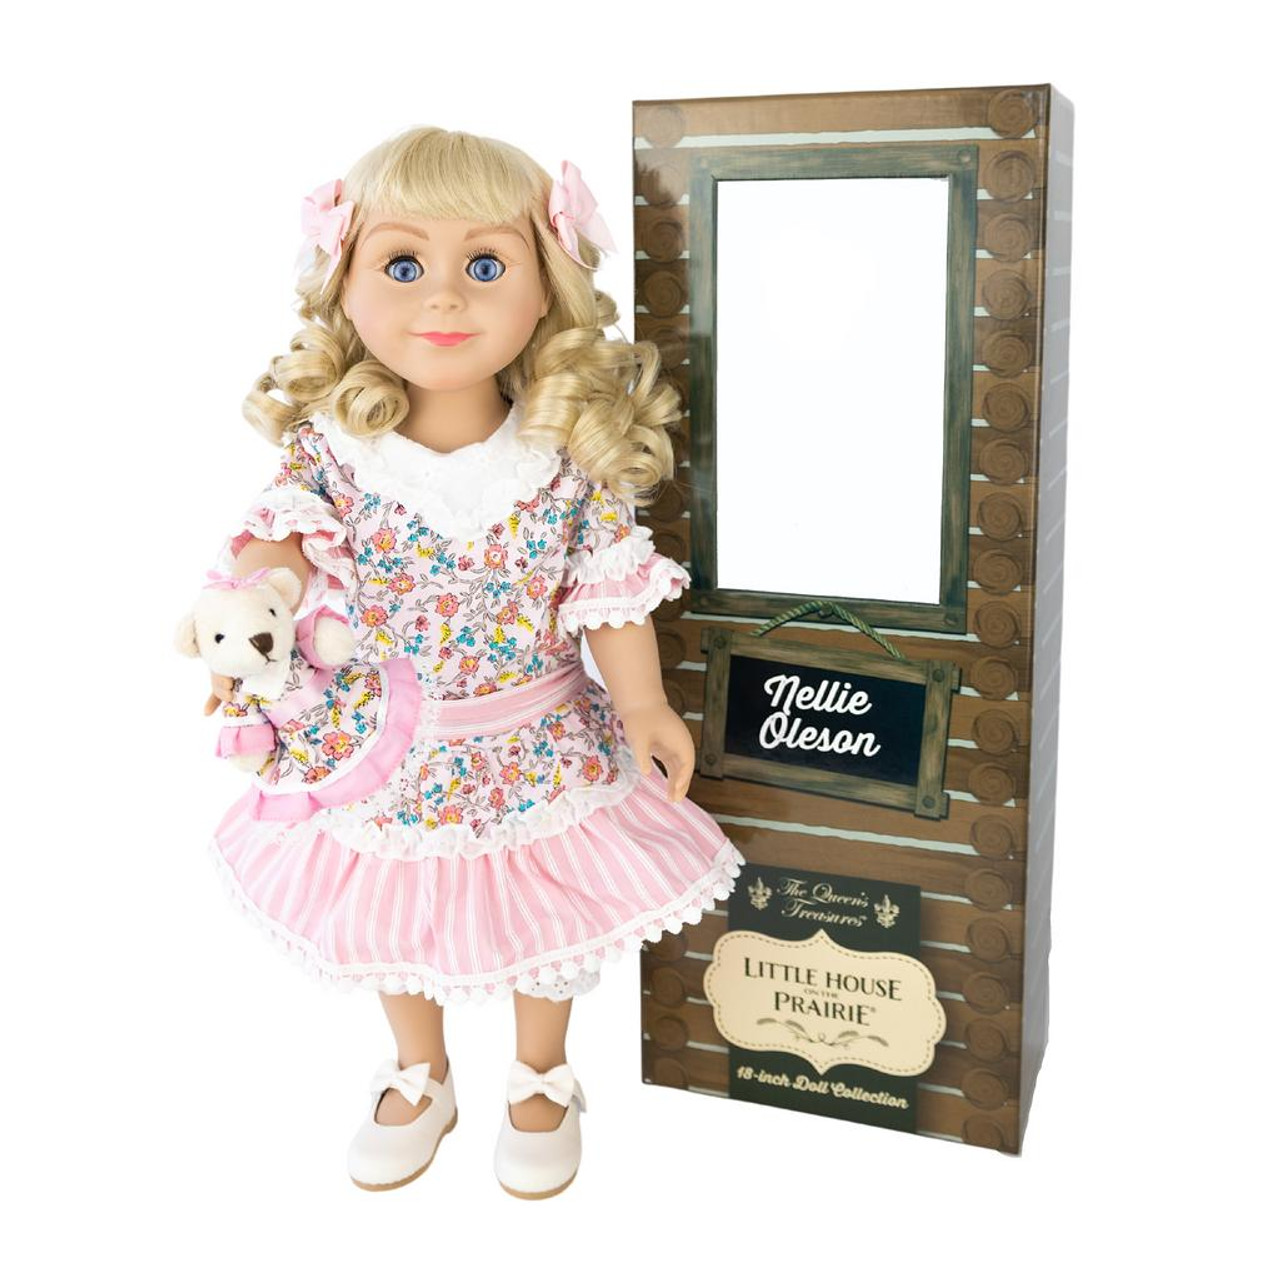 https://cdn11.bigcommerce.com/s-m5vcu70215/images/stencil/1280w/products/248/2793/the-queens-treasures-little-house-on-the-prairie-nellie-oleson-18-inch-doll__72567.1692302442.jpg